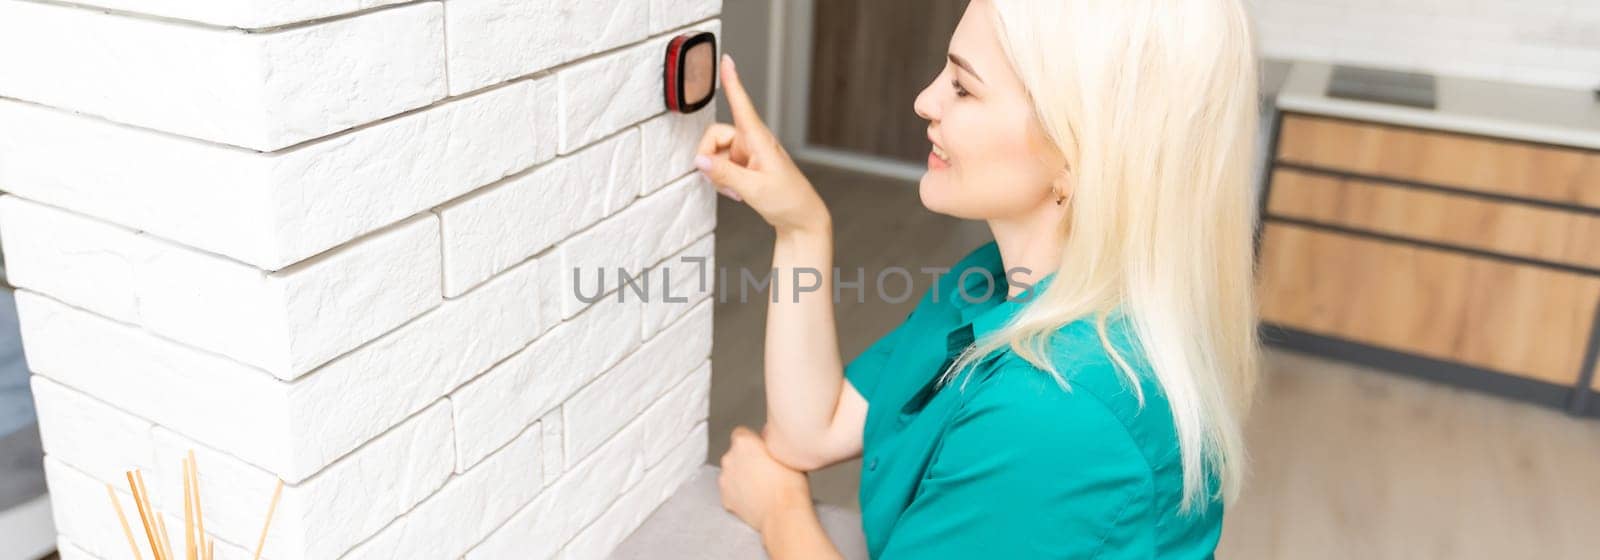 Close Up Of Woman Adjusting Wall Mounted Digital Central Heating Thermostat Control At Home.